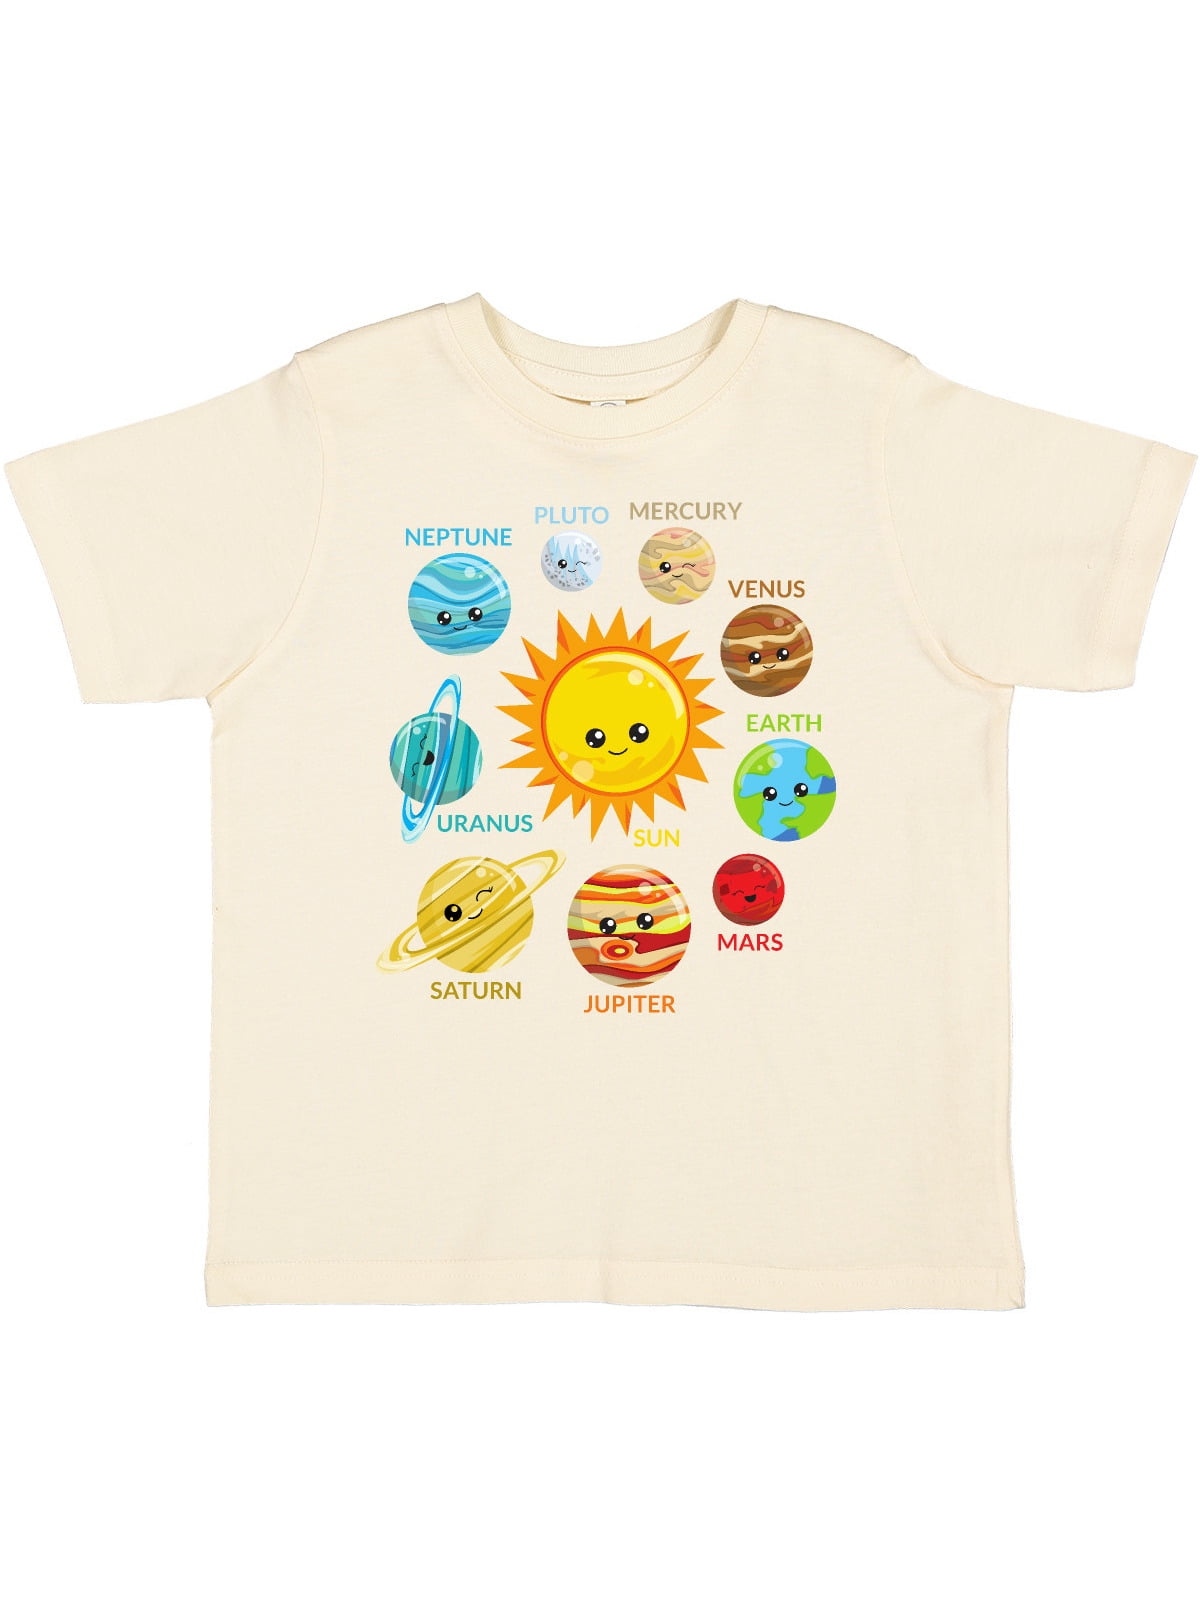 Space Boy Girl Child Sizes NEW Solar System Kids T-Shirt from The Mountain 